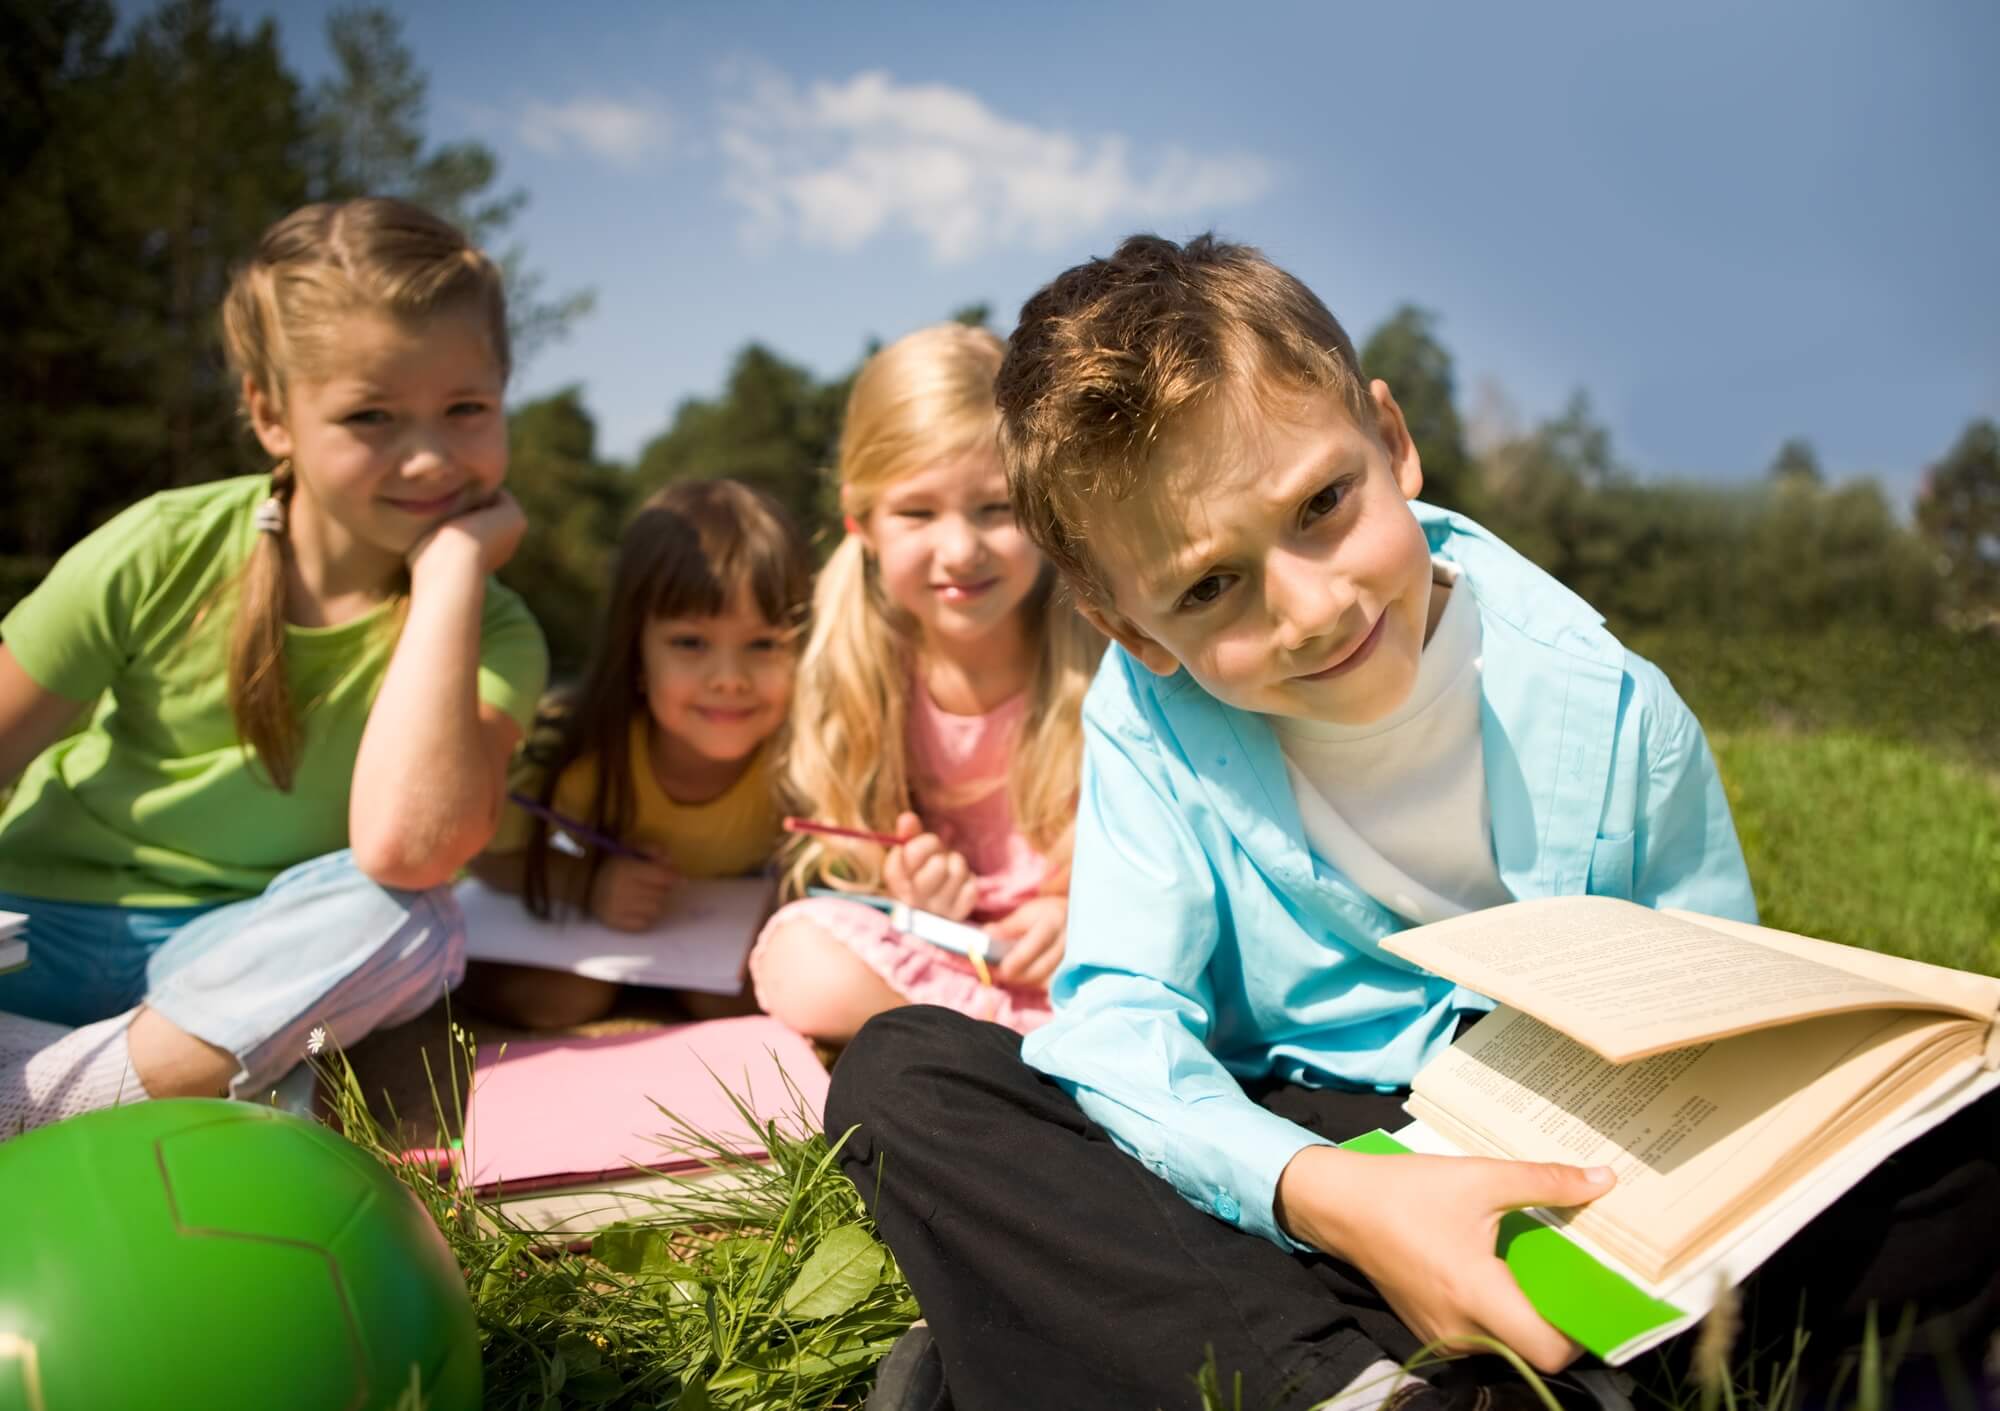 How to save money on books and build friendships by starting a kids book club.